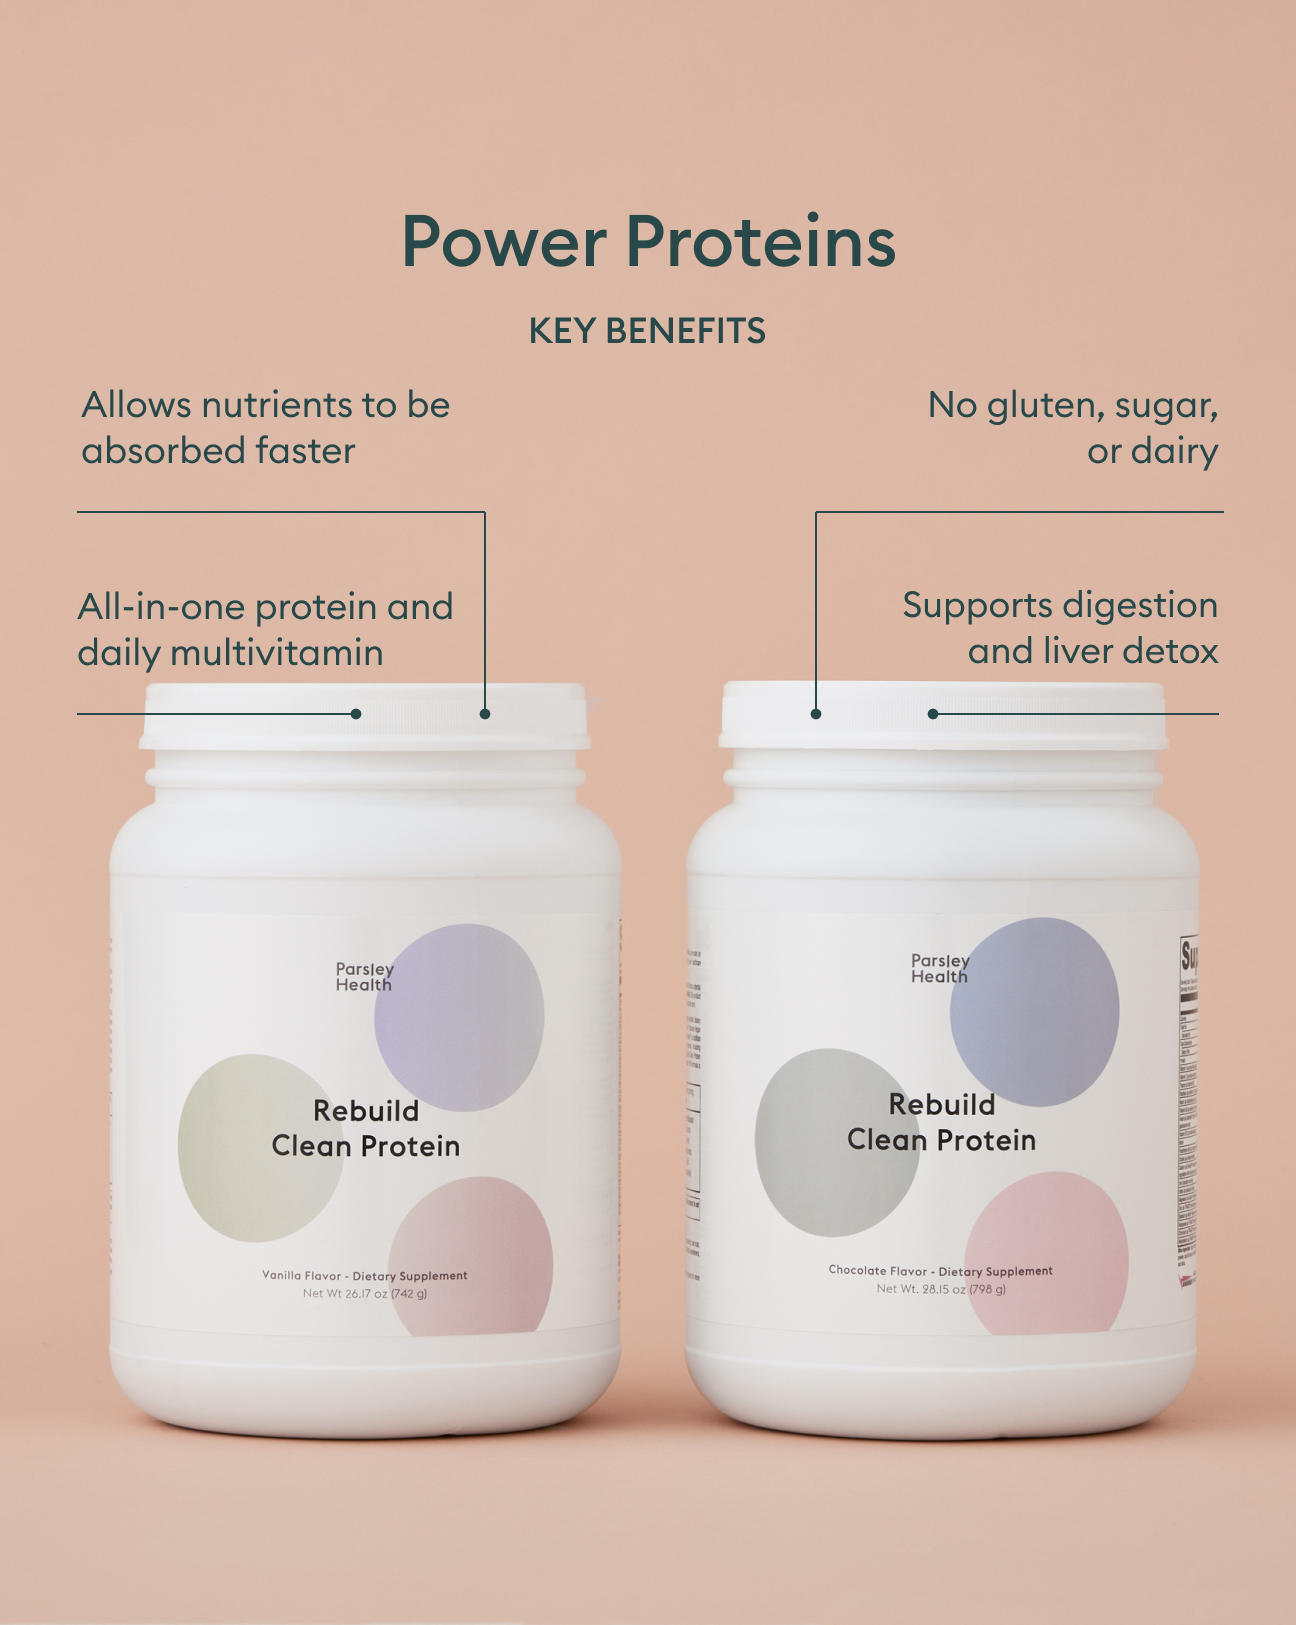 Power Proteins